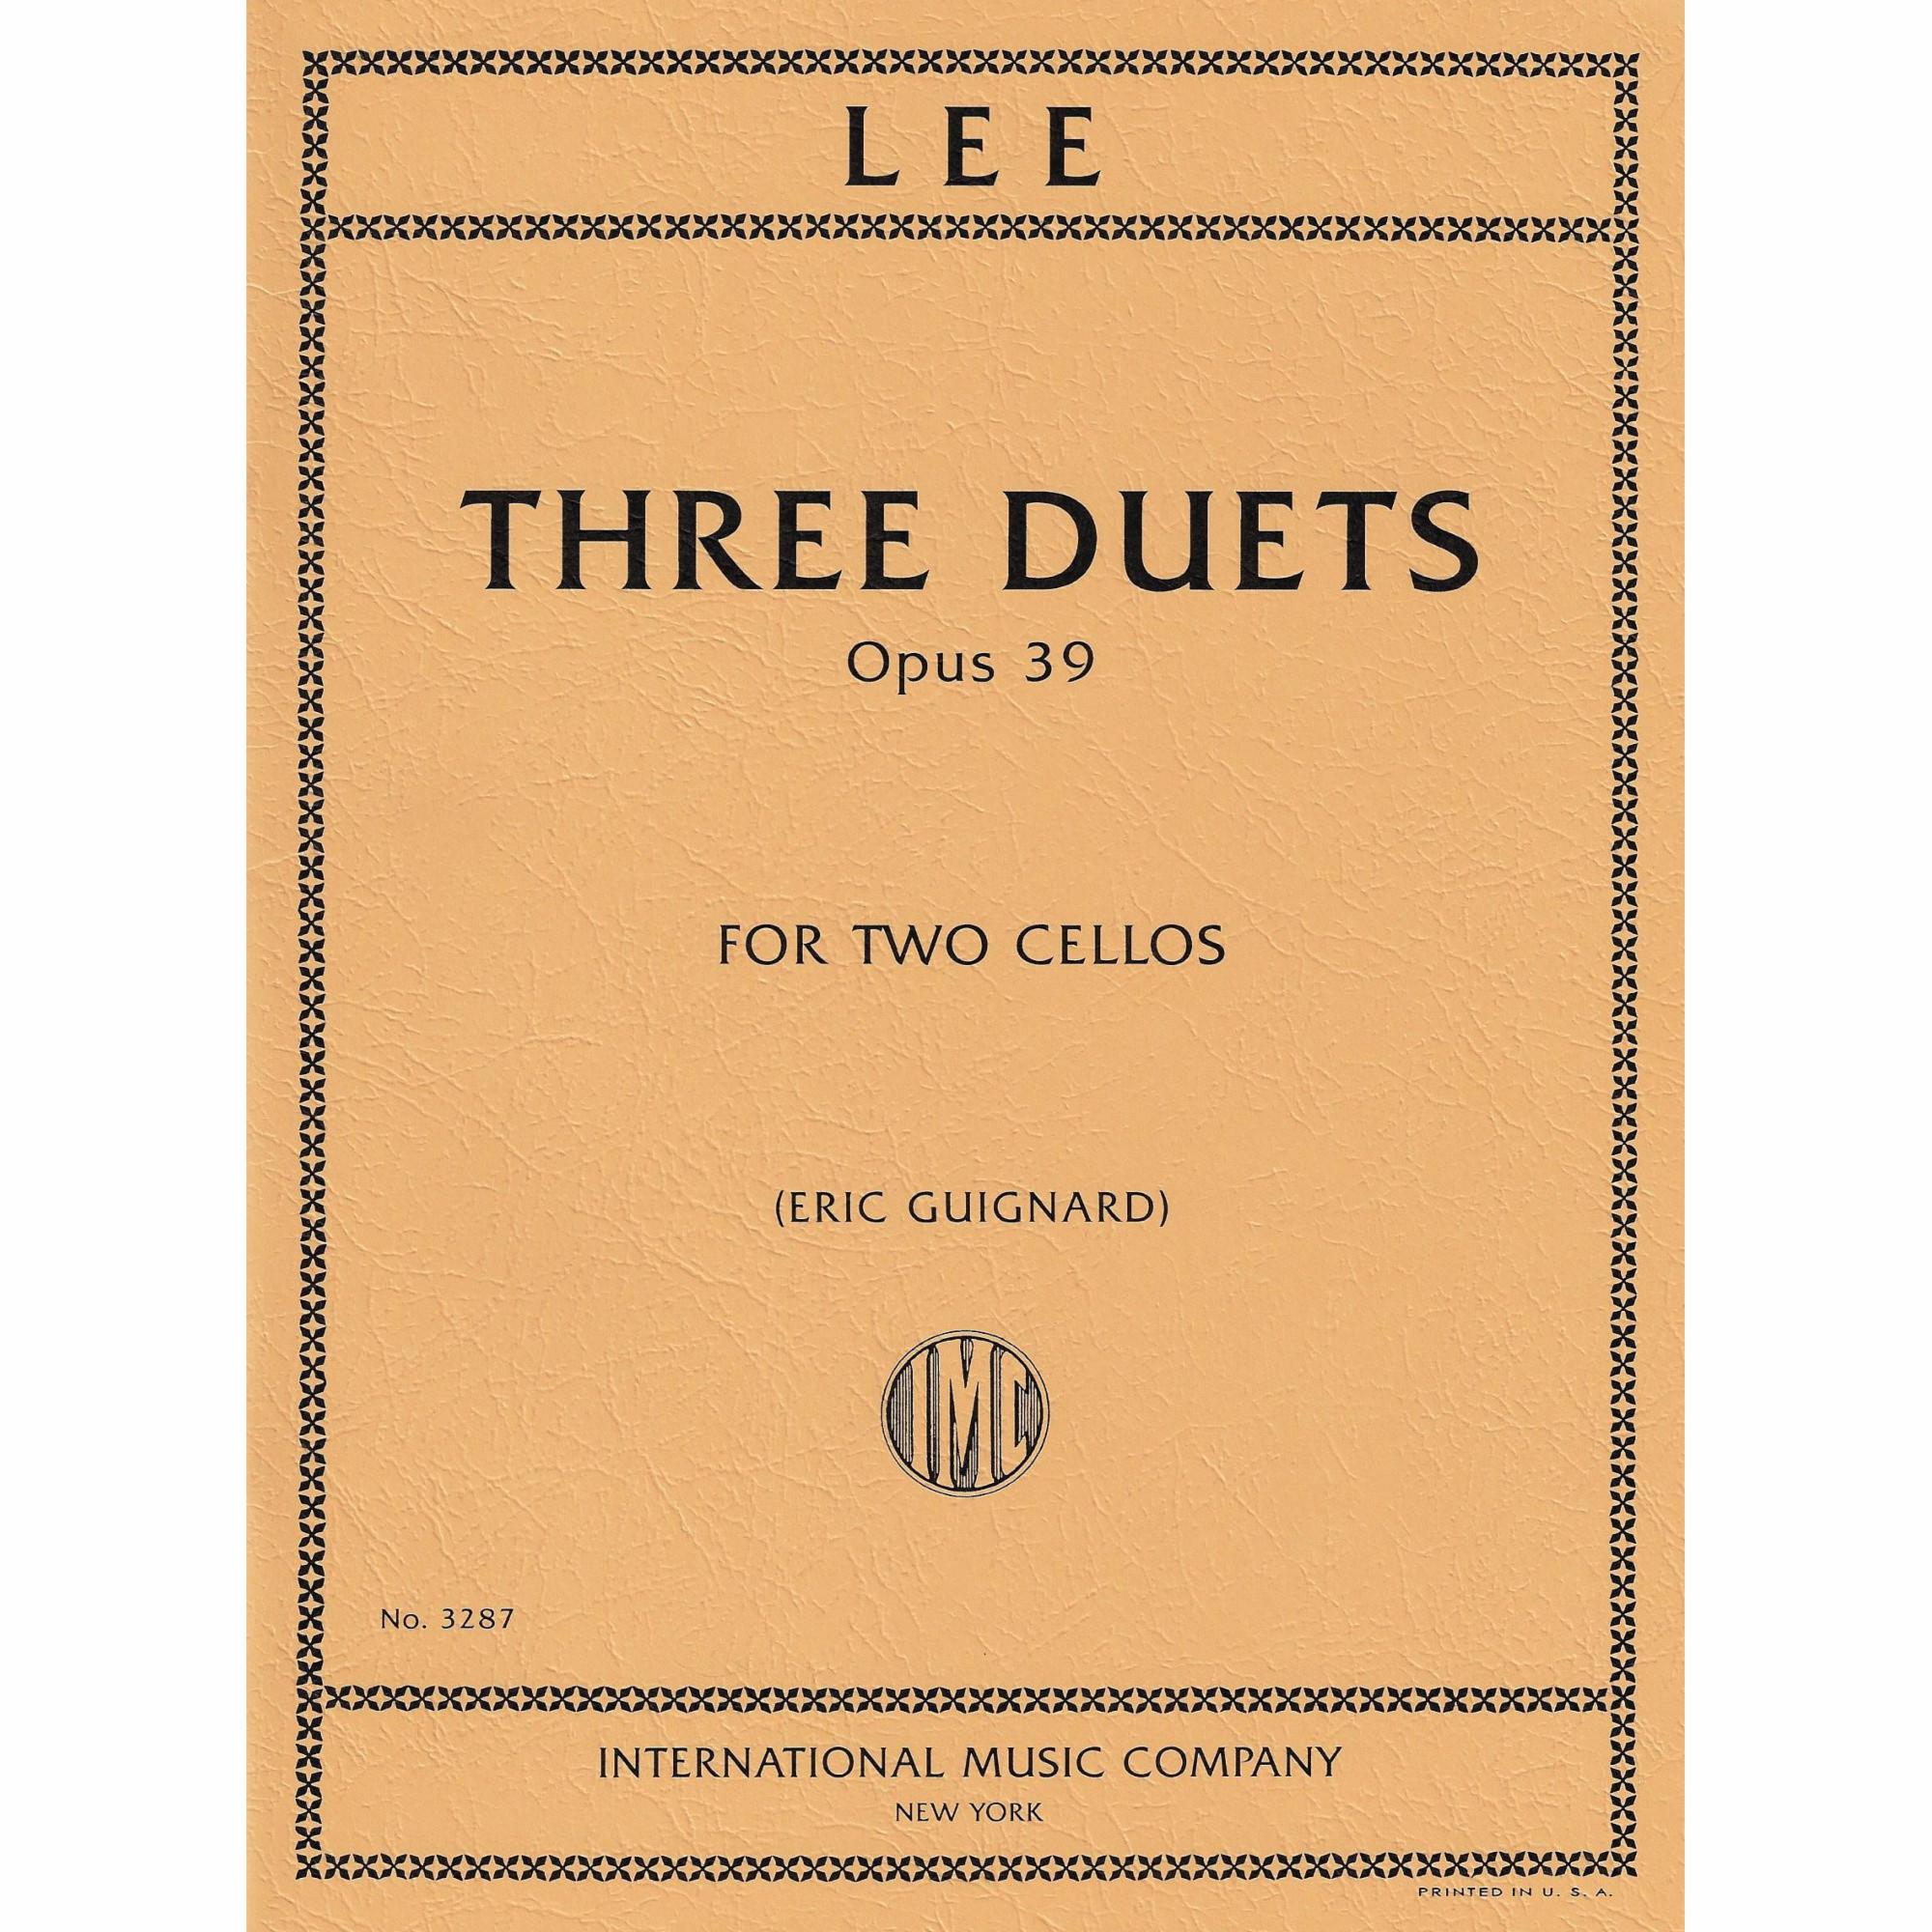 Lee -- Three Duets, Op. 39 for Two Cellos